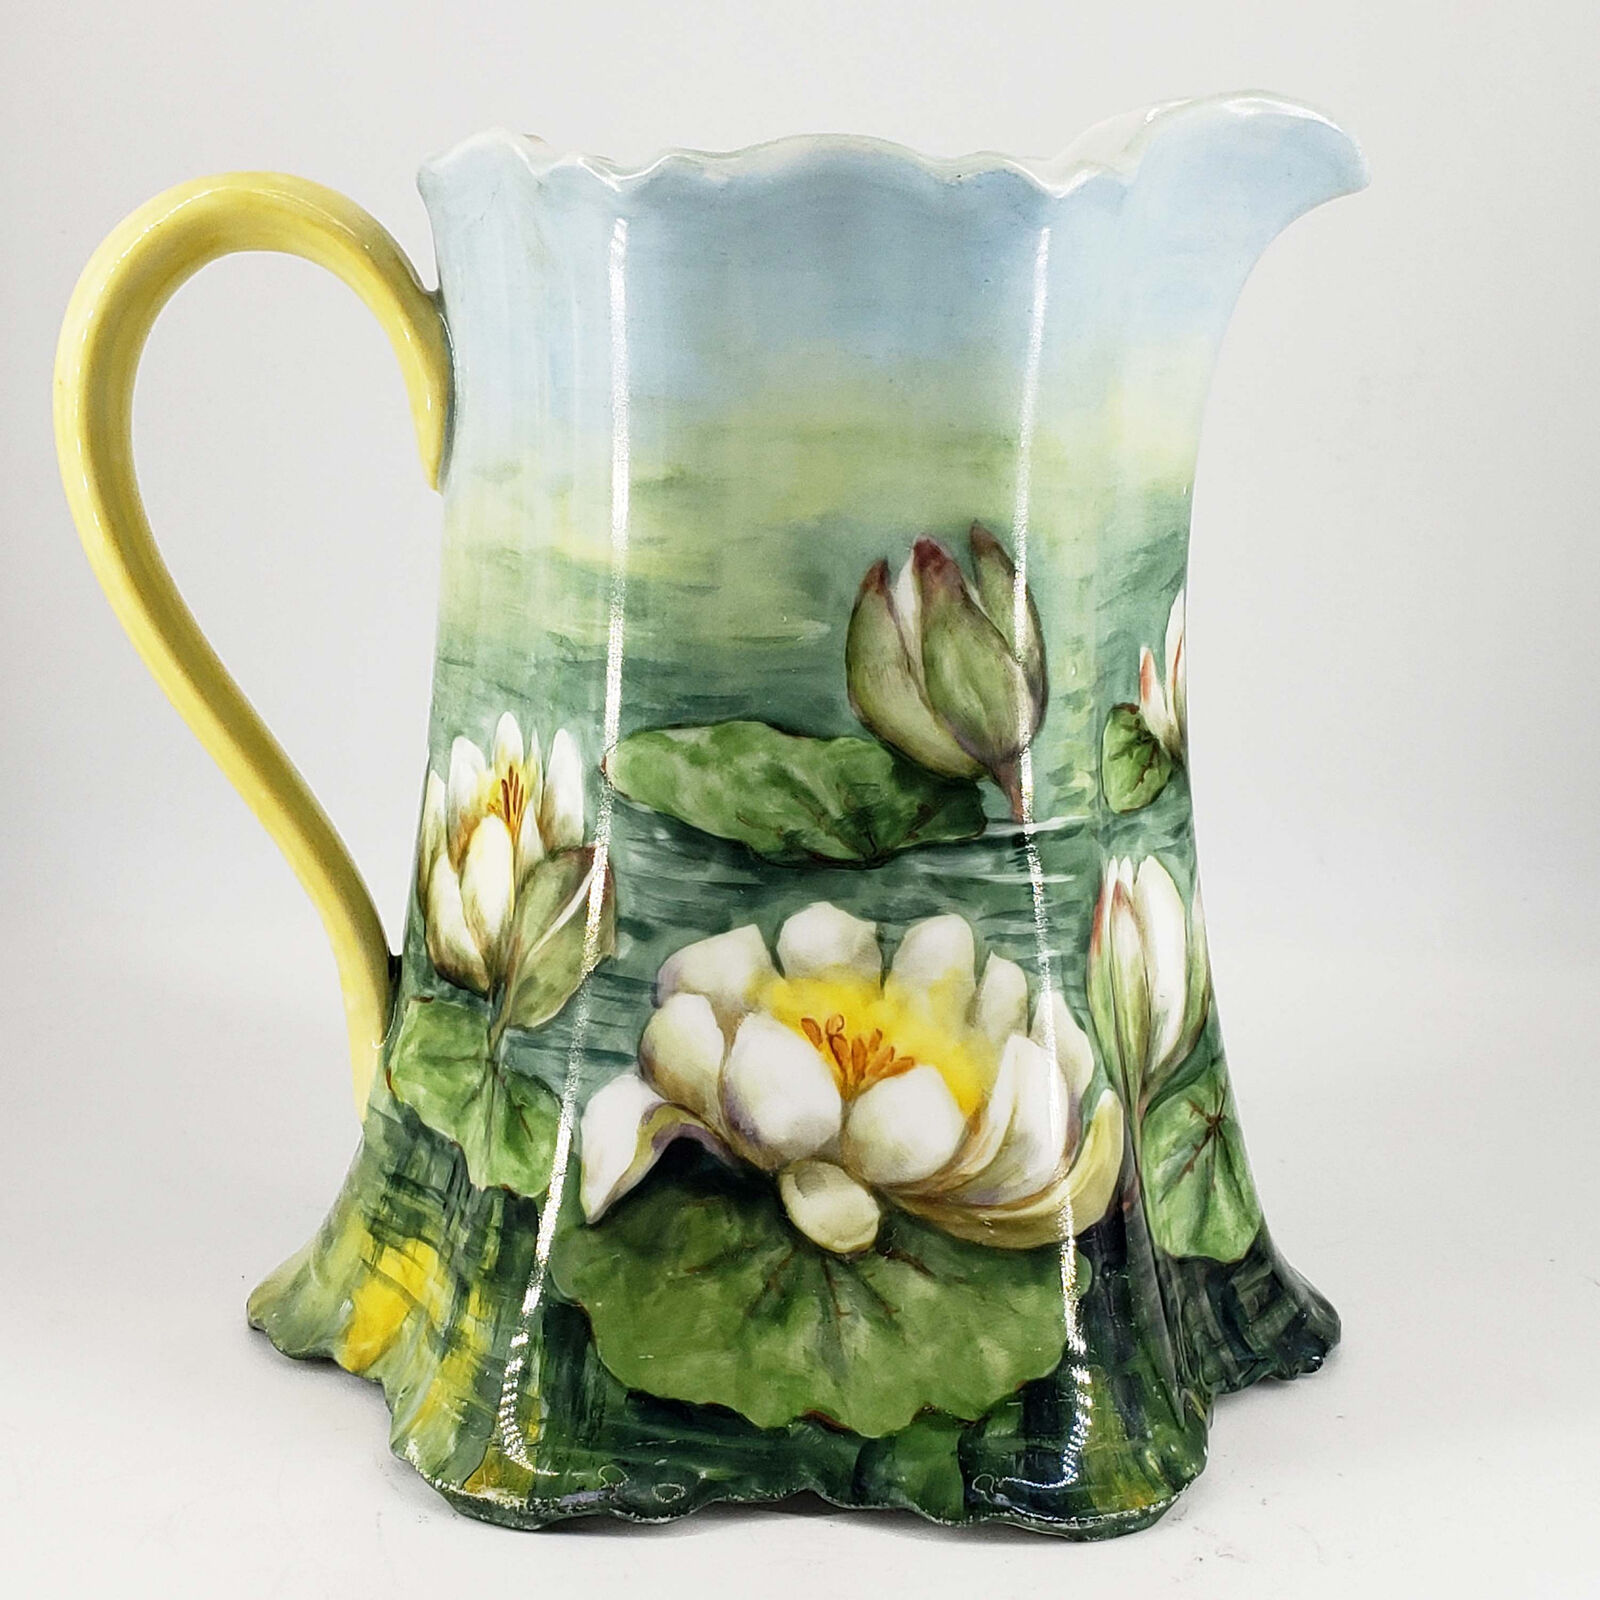 HAND PAINTED Antique WATER LILLY HABSBURG CHINA AUSTRIA PORCELAIN PITCHER